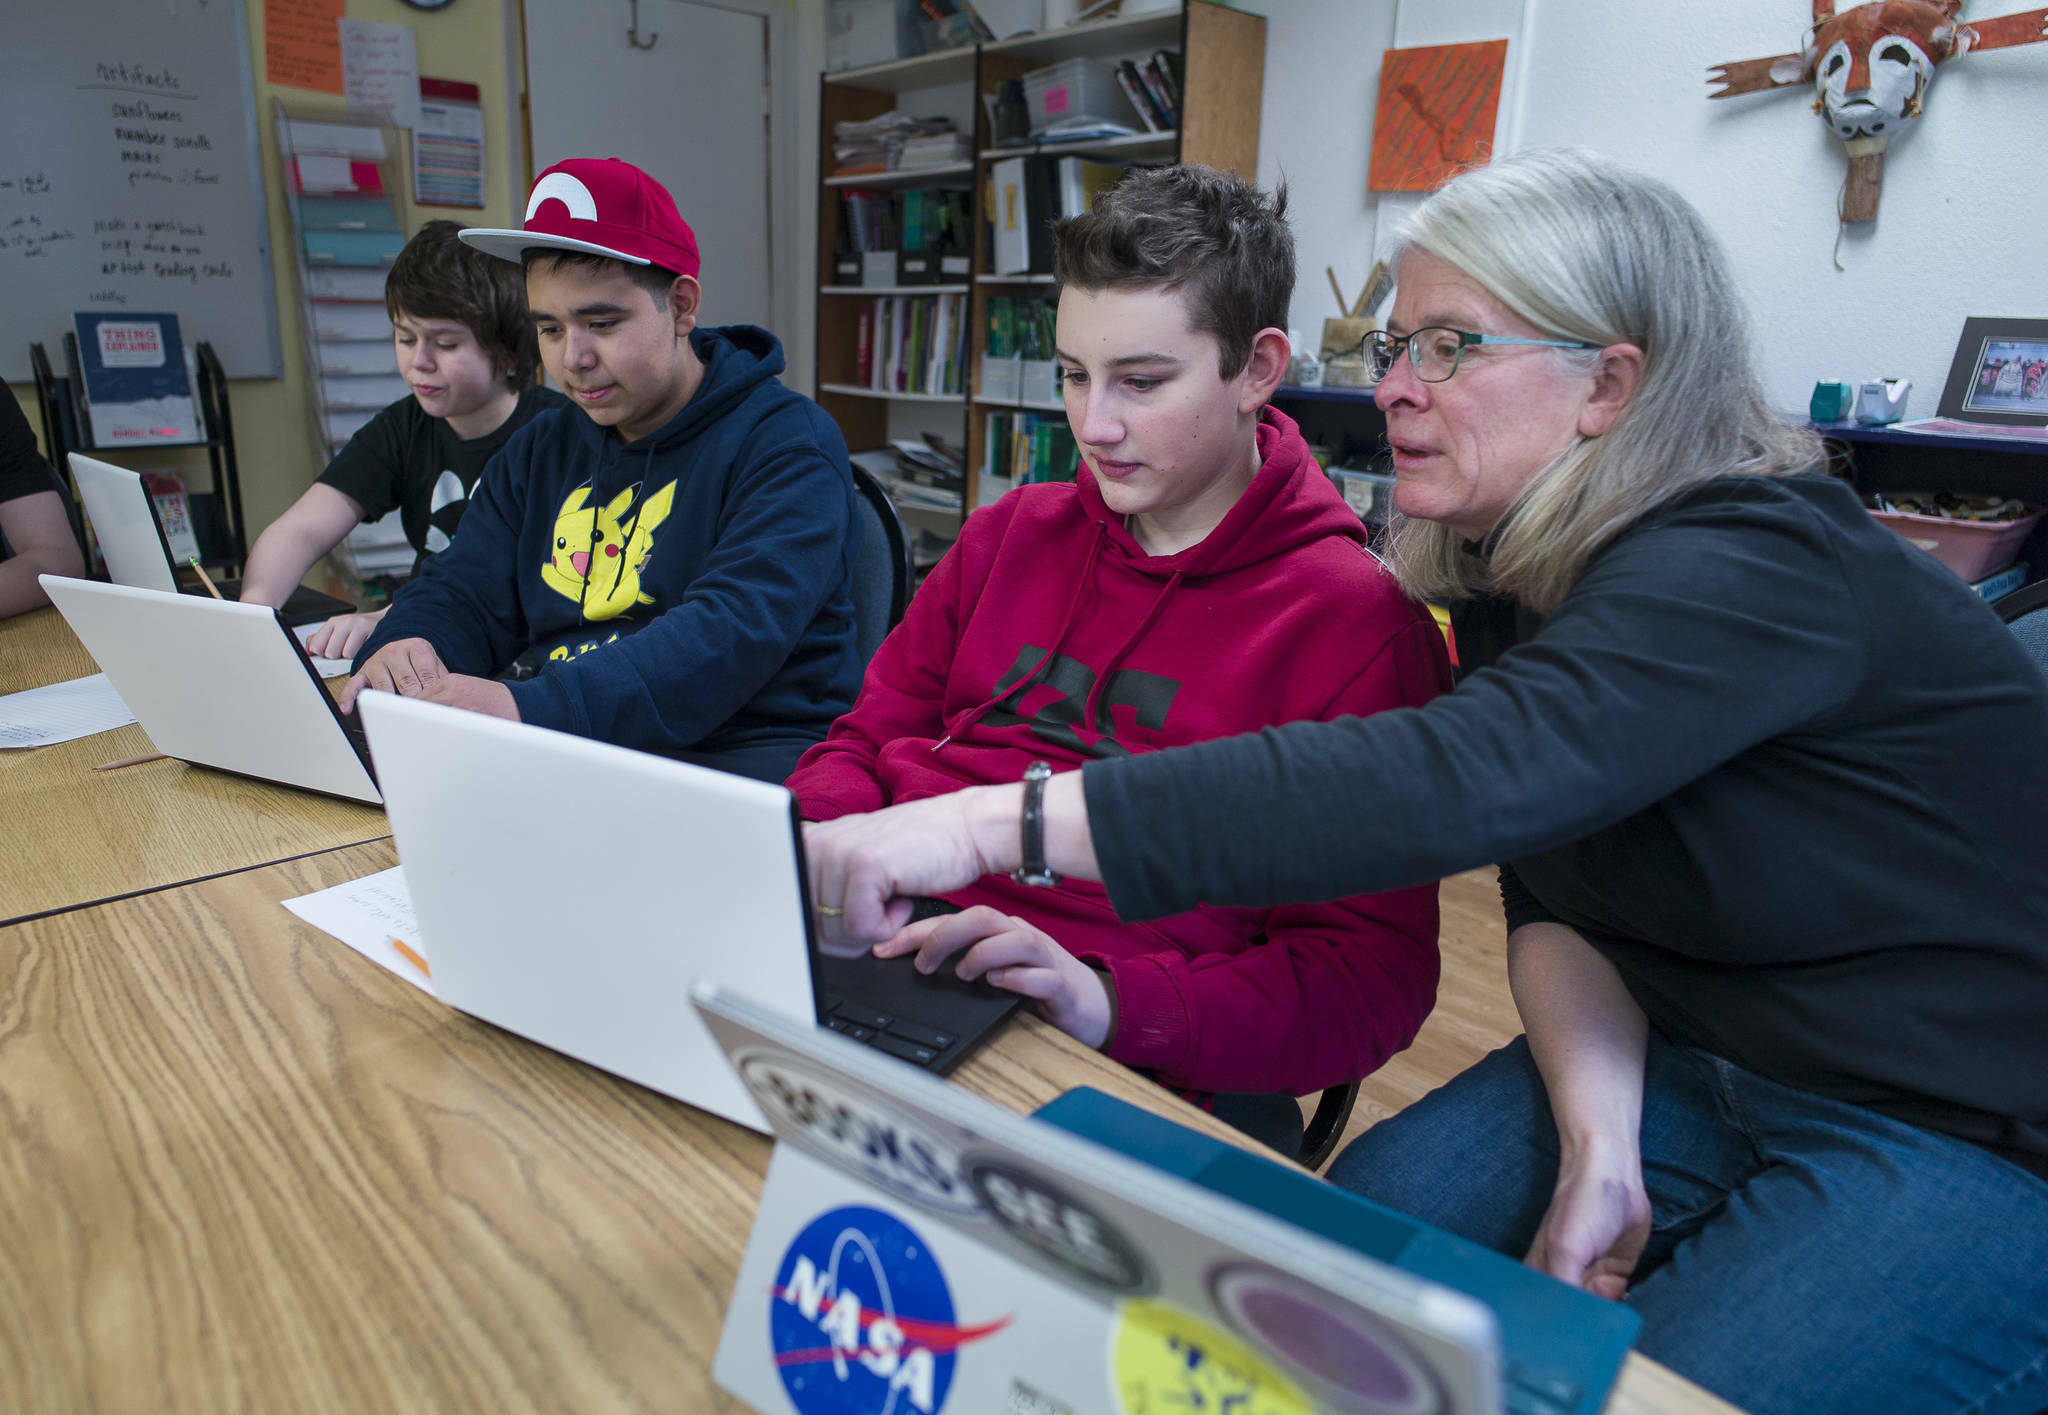 Math Specialist Brenda Taylor helps eighth-graders Fisher Lee, right, and Jorge Cordero, center, and sixth-grader Joshua Kessler with their coding project at the Juneau Community Charter School on Wednesday, Jan. 10, 2018. The school celebrated its 20th anniversary that year. (Michael Penn / Juneau Empire file photo)